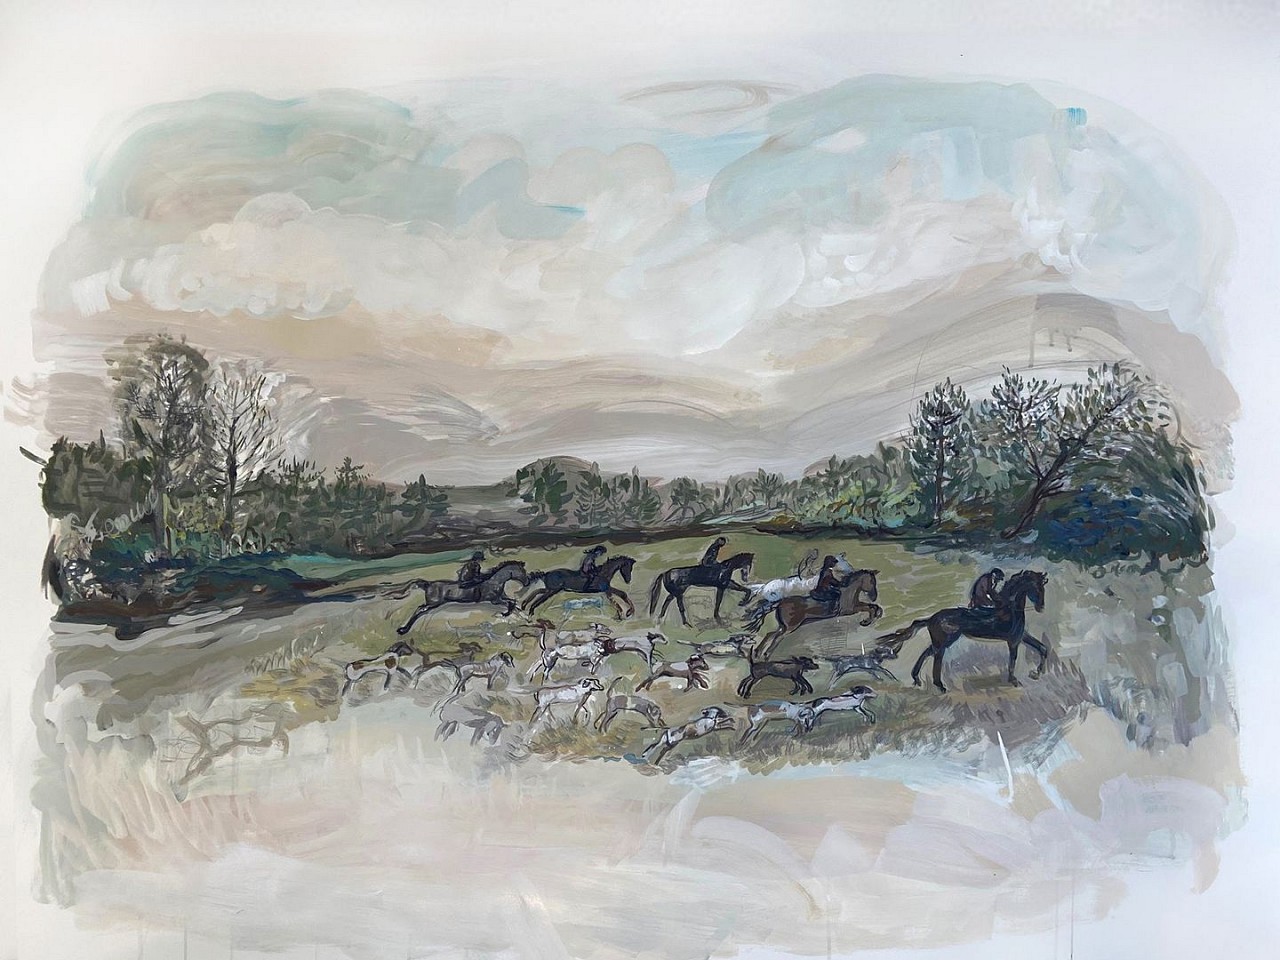 Suzy Spence
Hunt Morning, 2021
SPENC293
flashe on paper, 38 x 51 inches